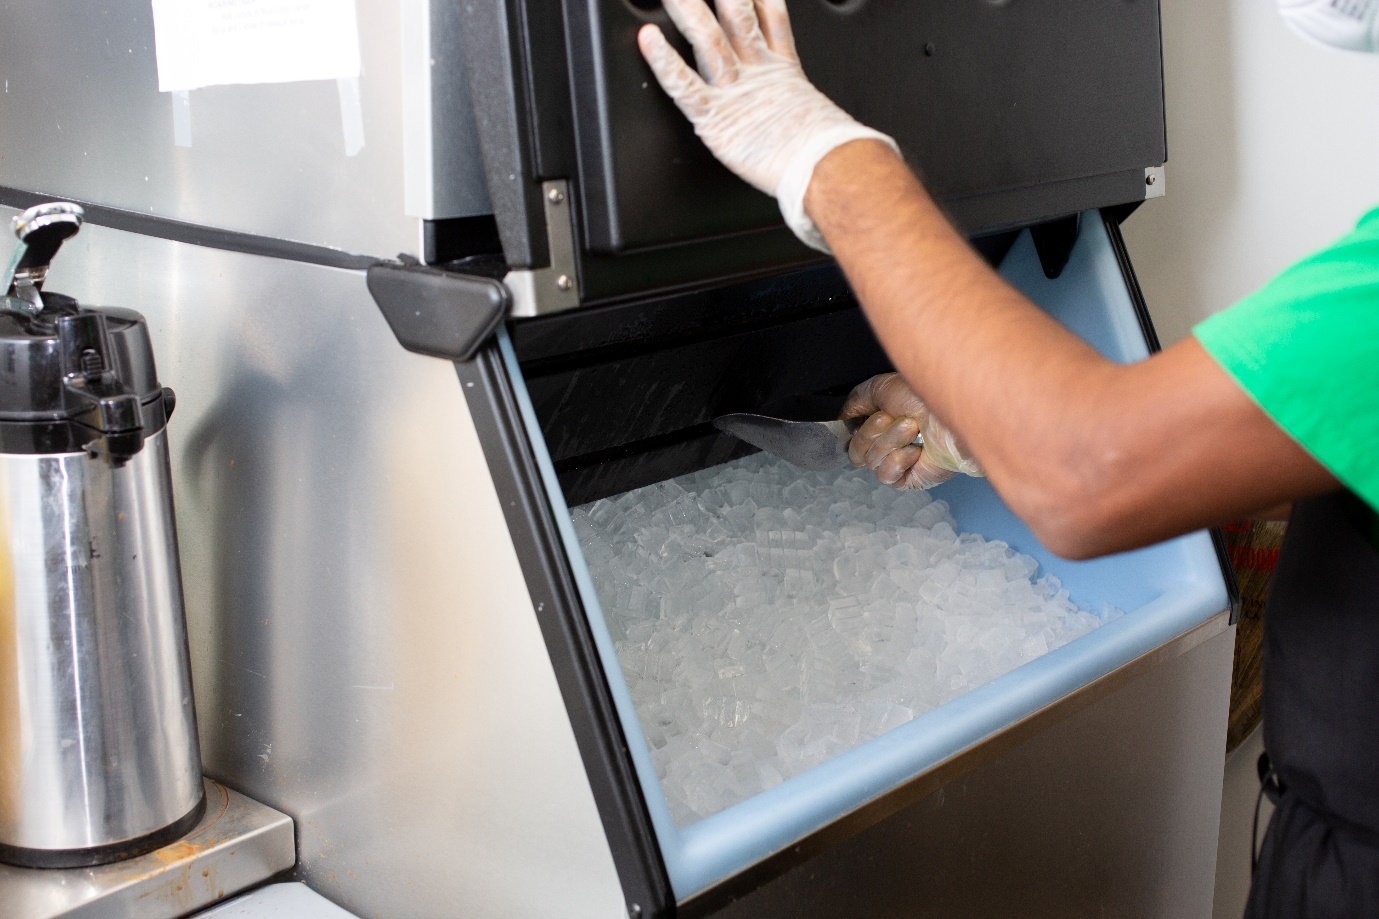 An employee scooping out ice